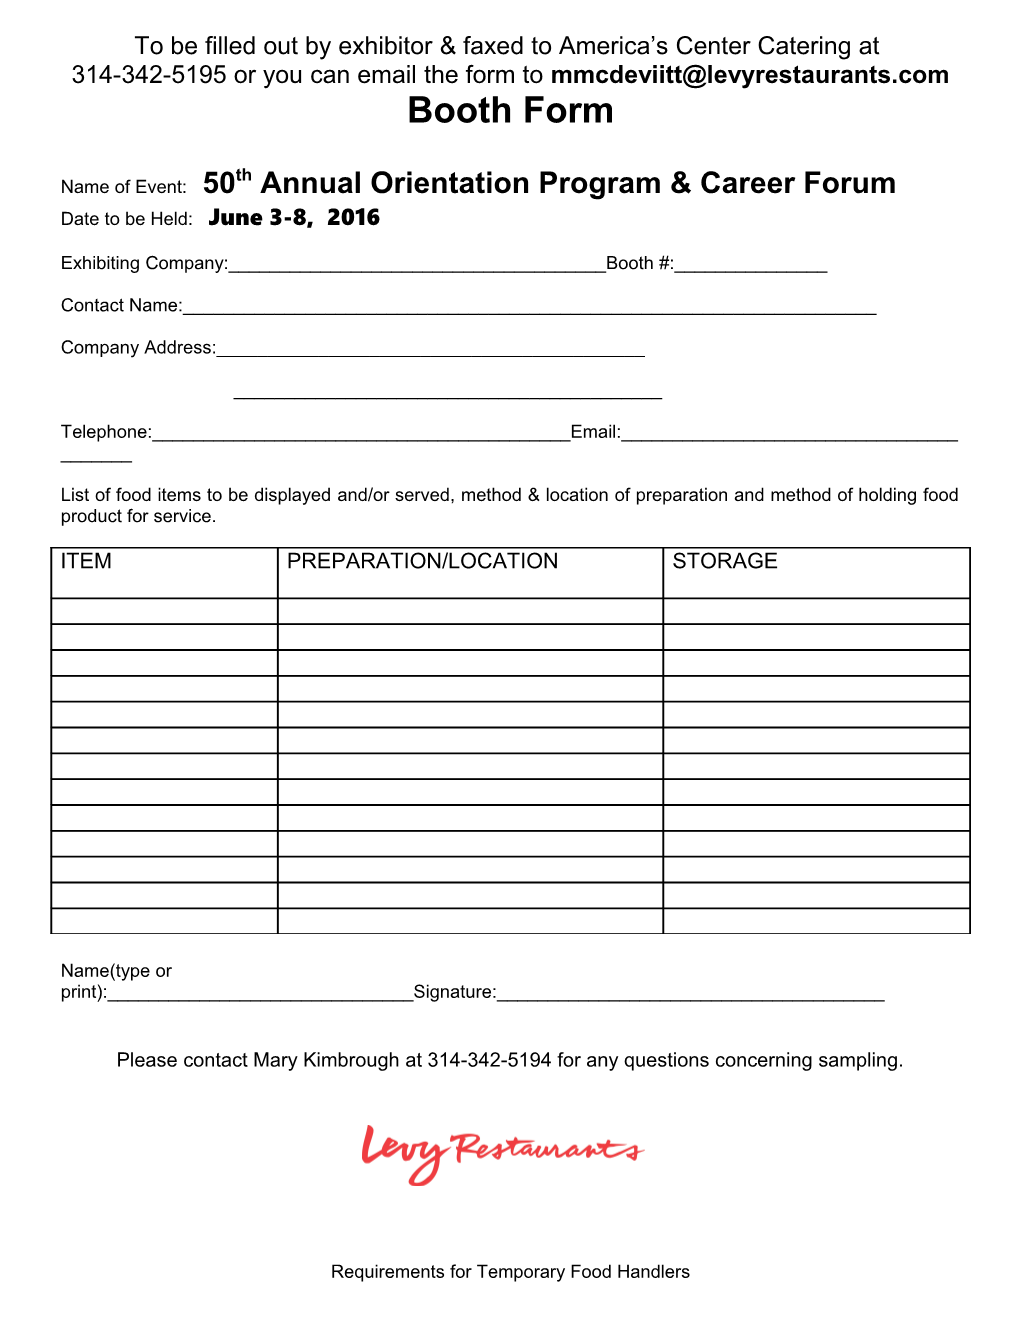 To Be Filled out by Exhibitor & Faxed To